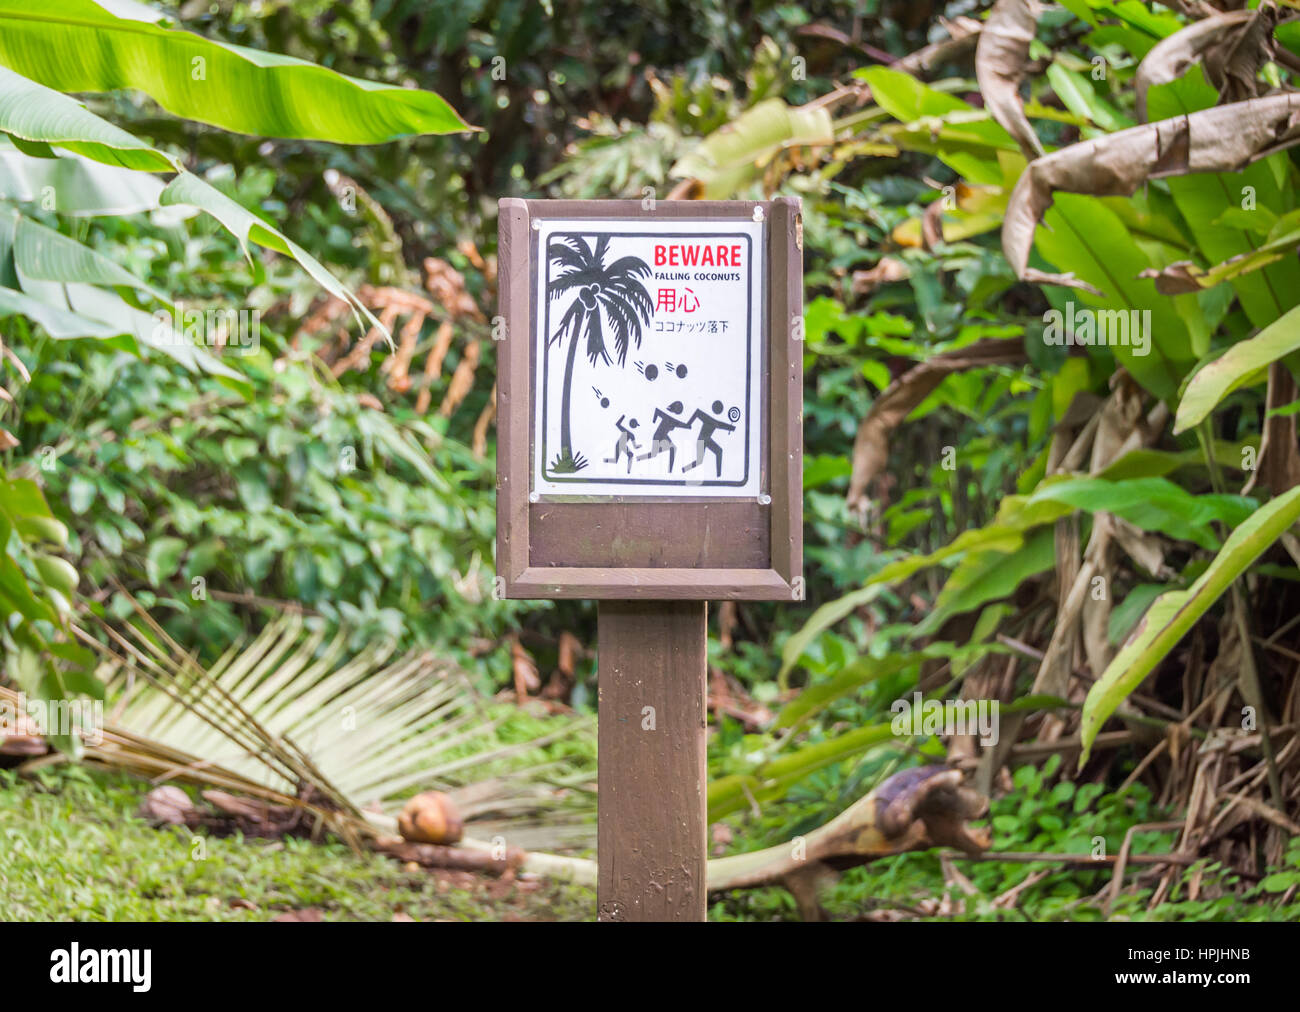 A ridiculous warning sign indicating danger due to falling coconuts, written in English and Japanese. Stock Photo